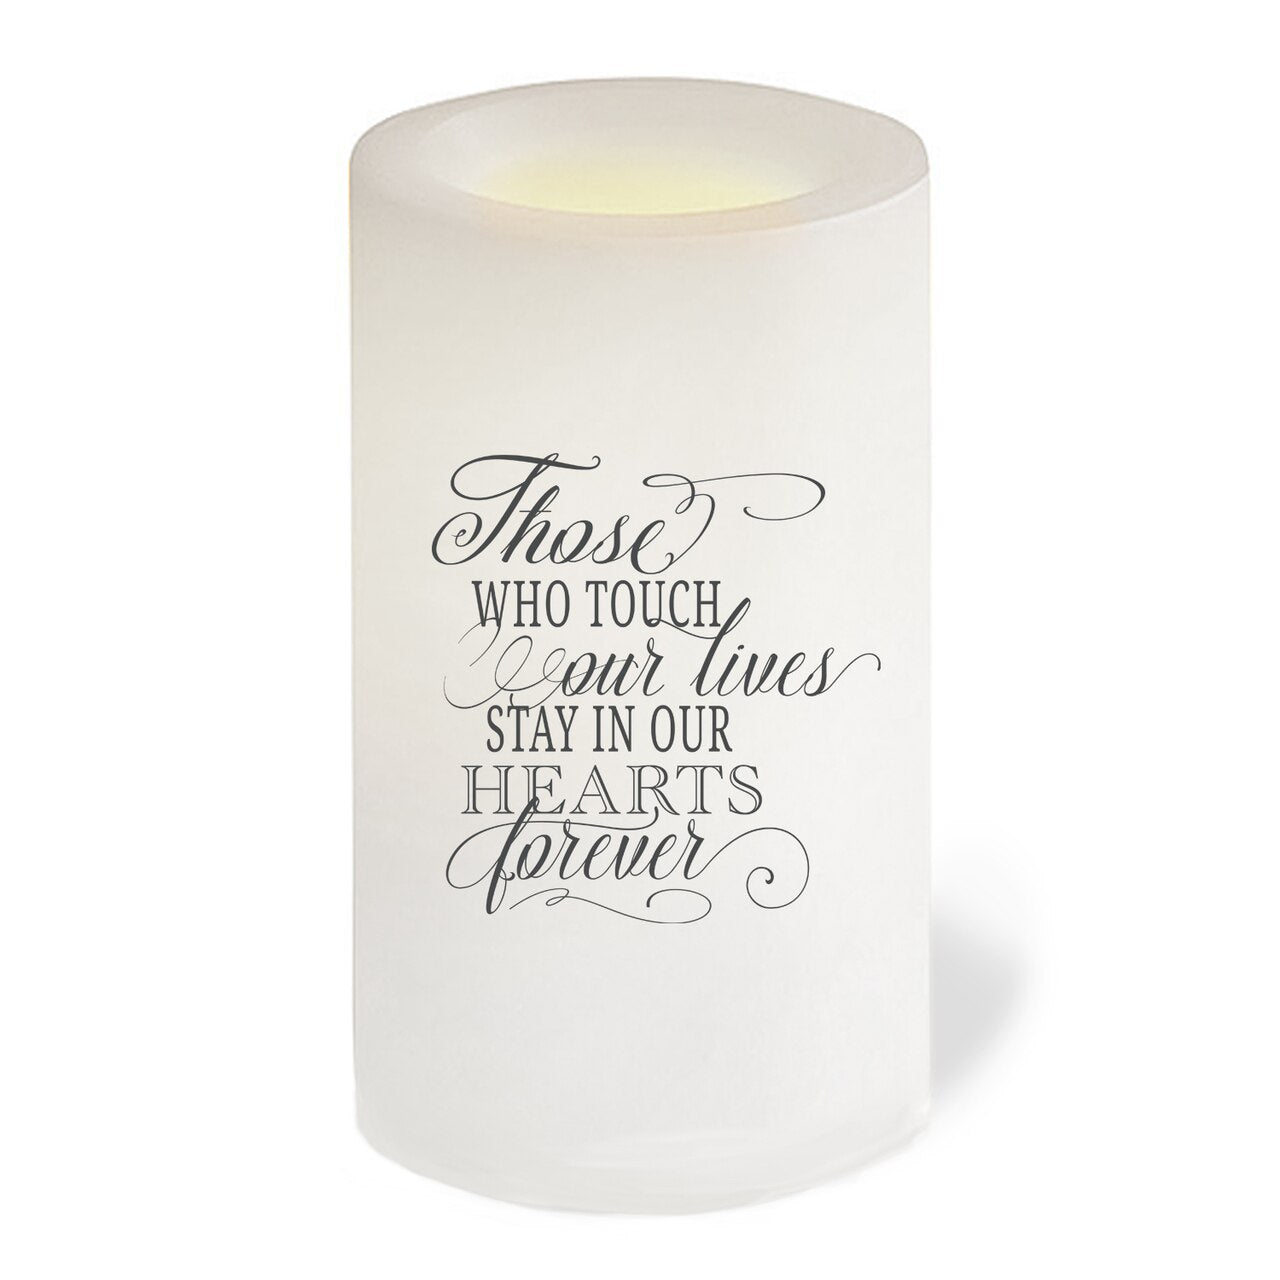 Beautiful Life LED Flameless Personalized Memorial Candle.